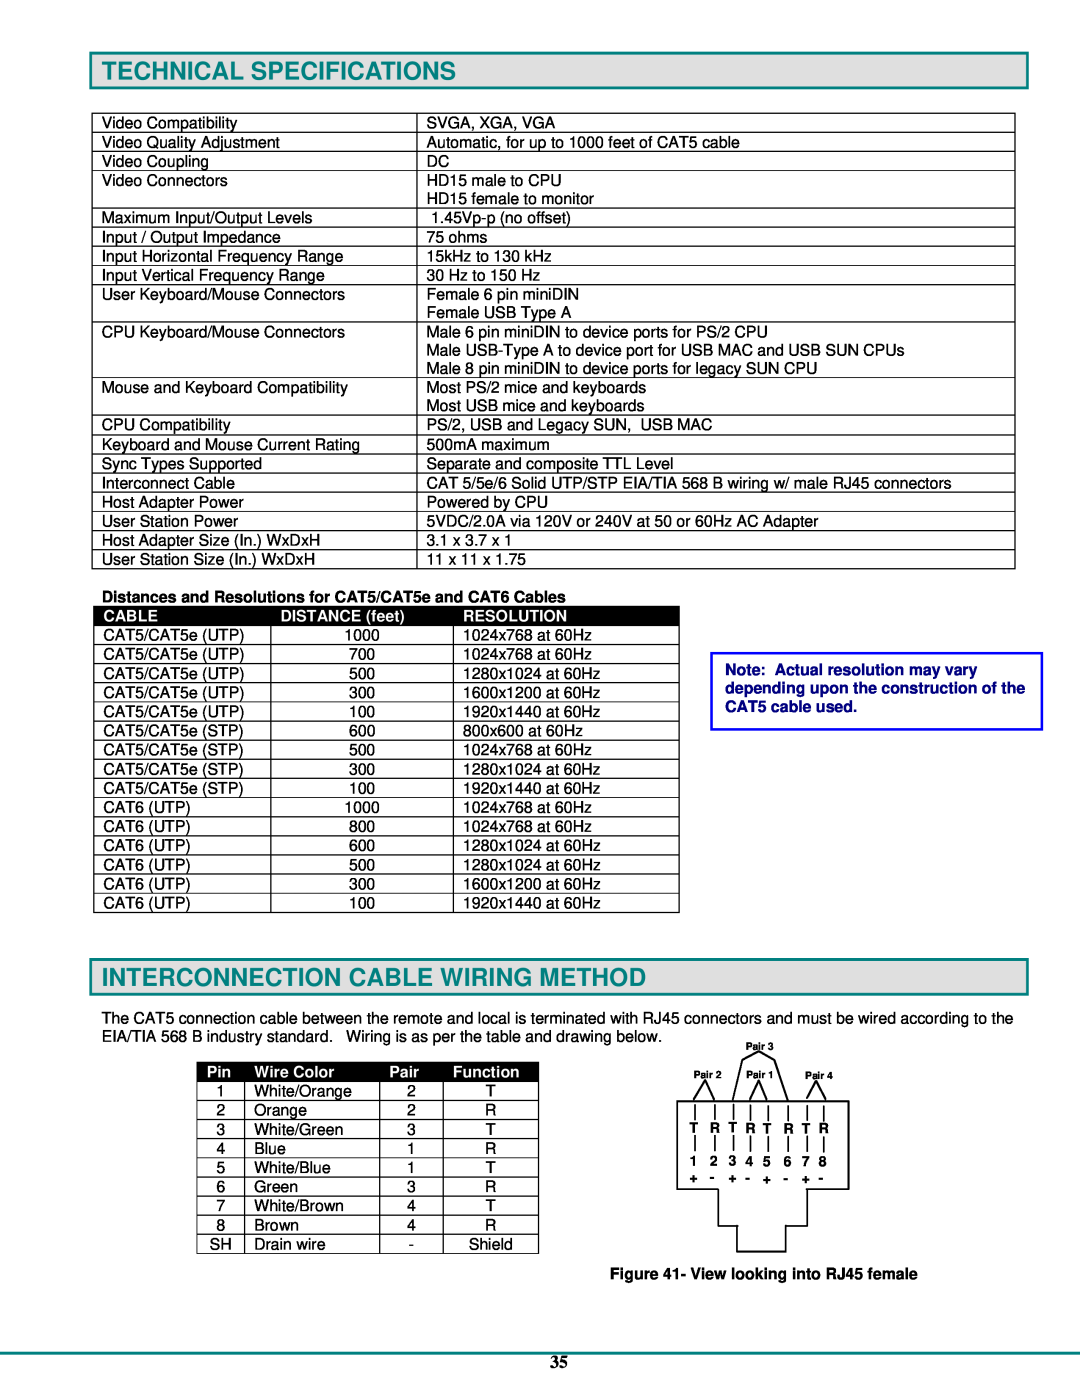 Network Technologies CAT5 Technical Specifications, Interconnection Cable Wiring Method, DISTANCE feet, Resolution, Pair 